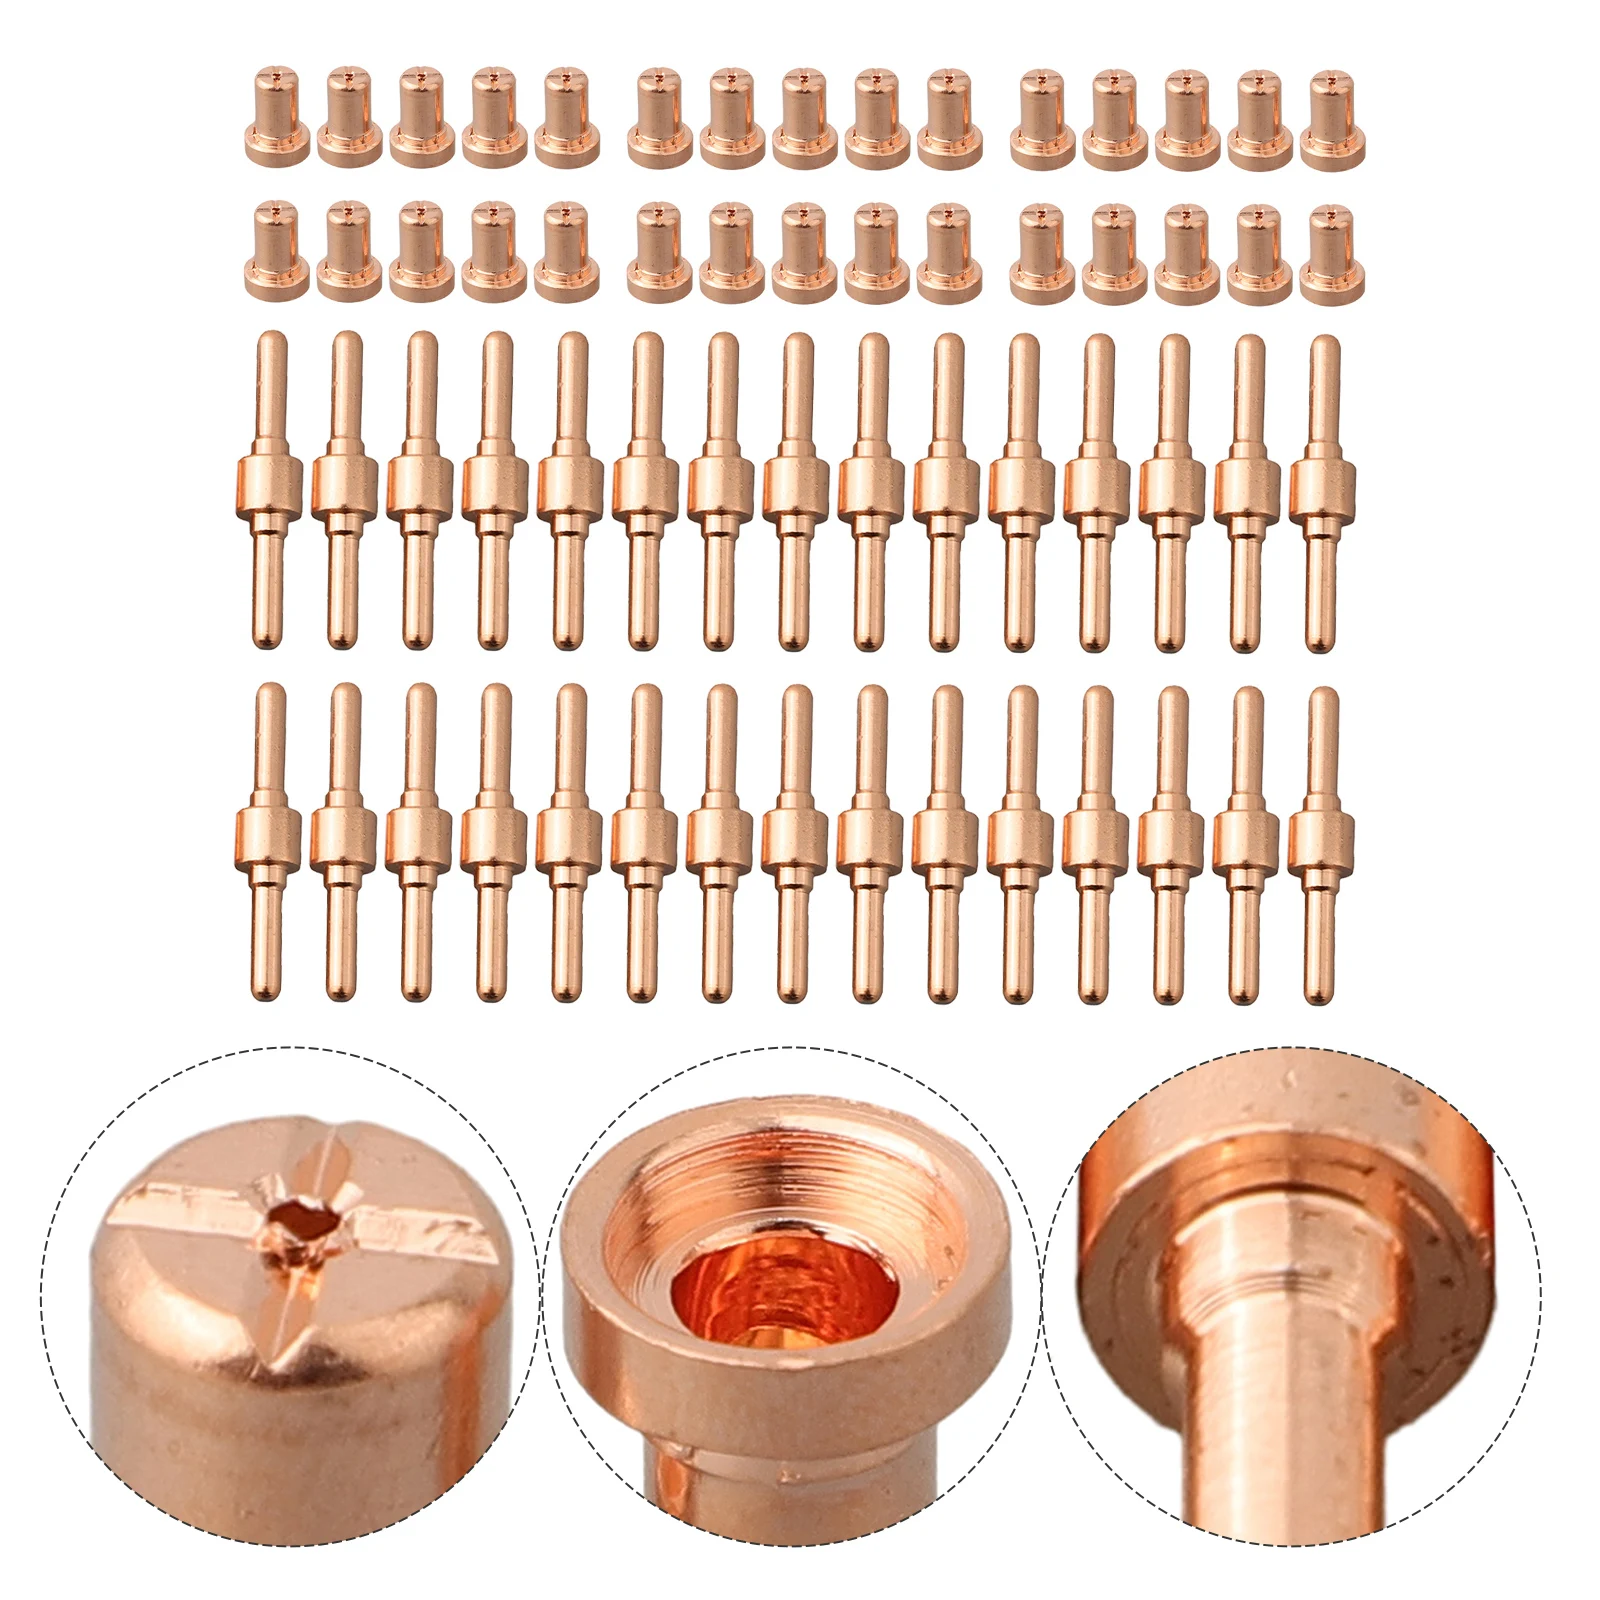 60pc/set PT-31 LG-40 Cutting Torch Copper Nozzle Electrode 40A Consumable Electrode Gas Ring CT312 CUT50 50A For Plasma Welder images - 6